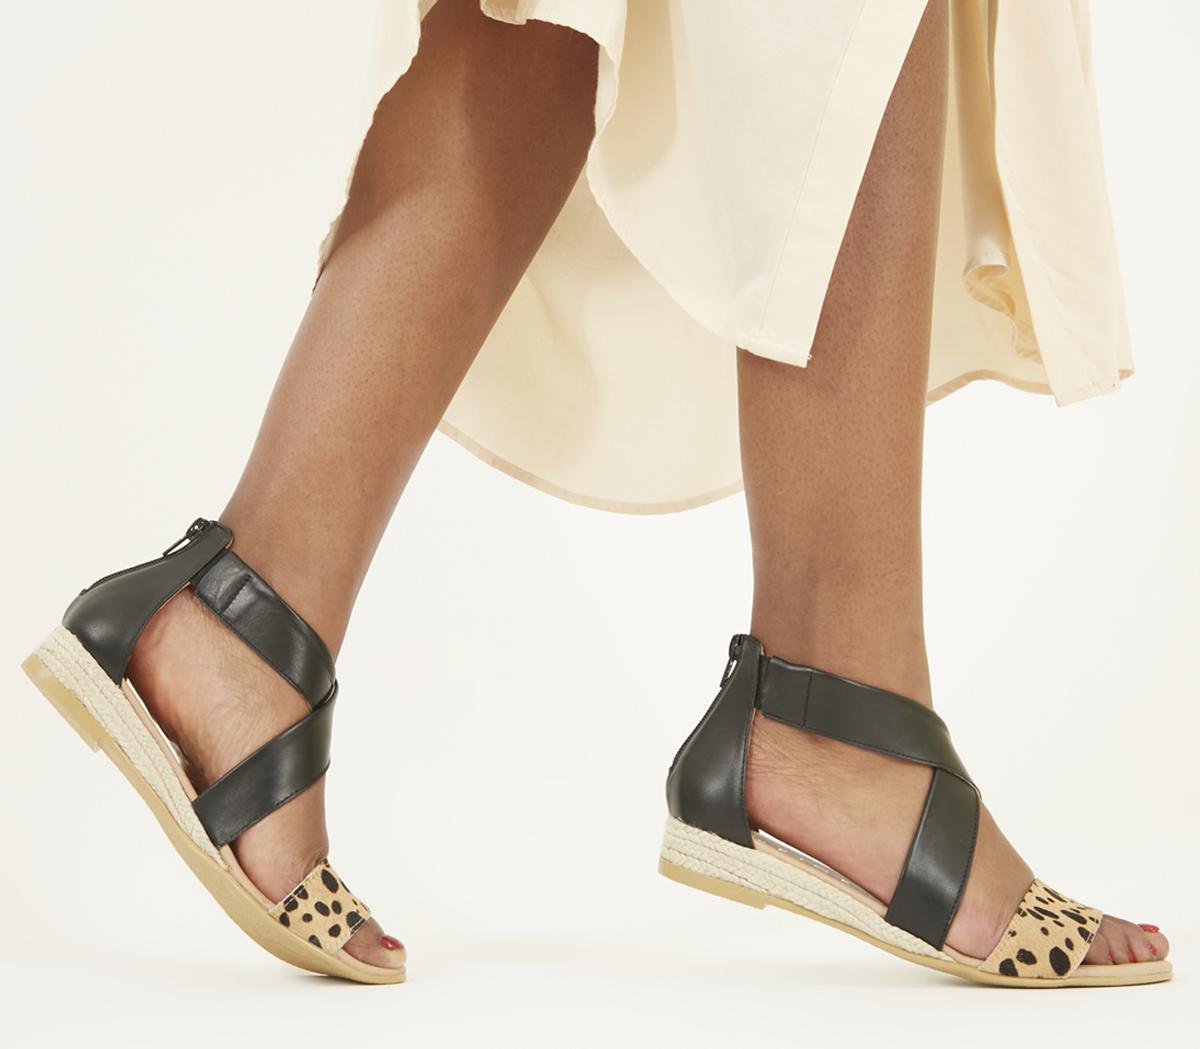 OFFICESally Espadrille Wedge SandalsBlack And Leopard Pony